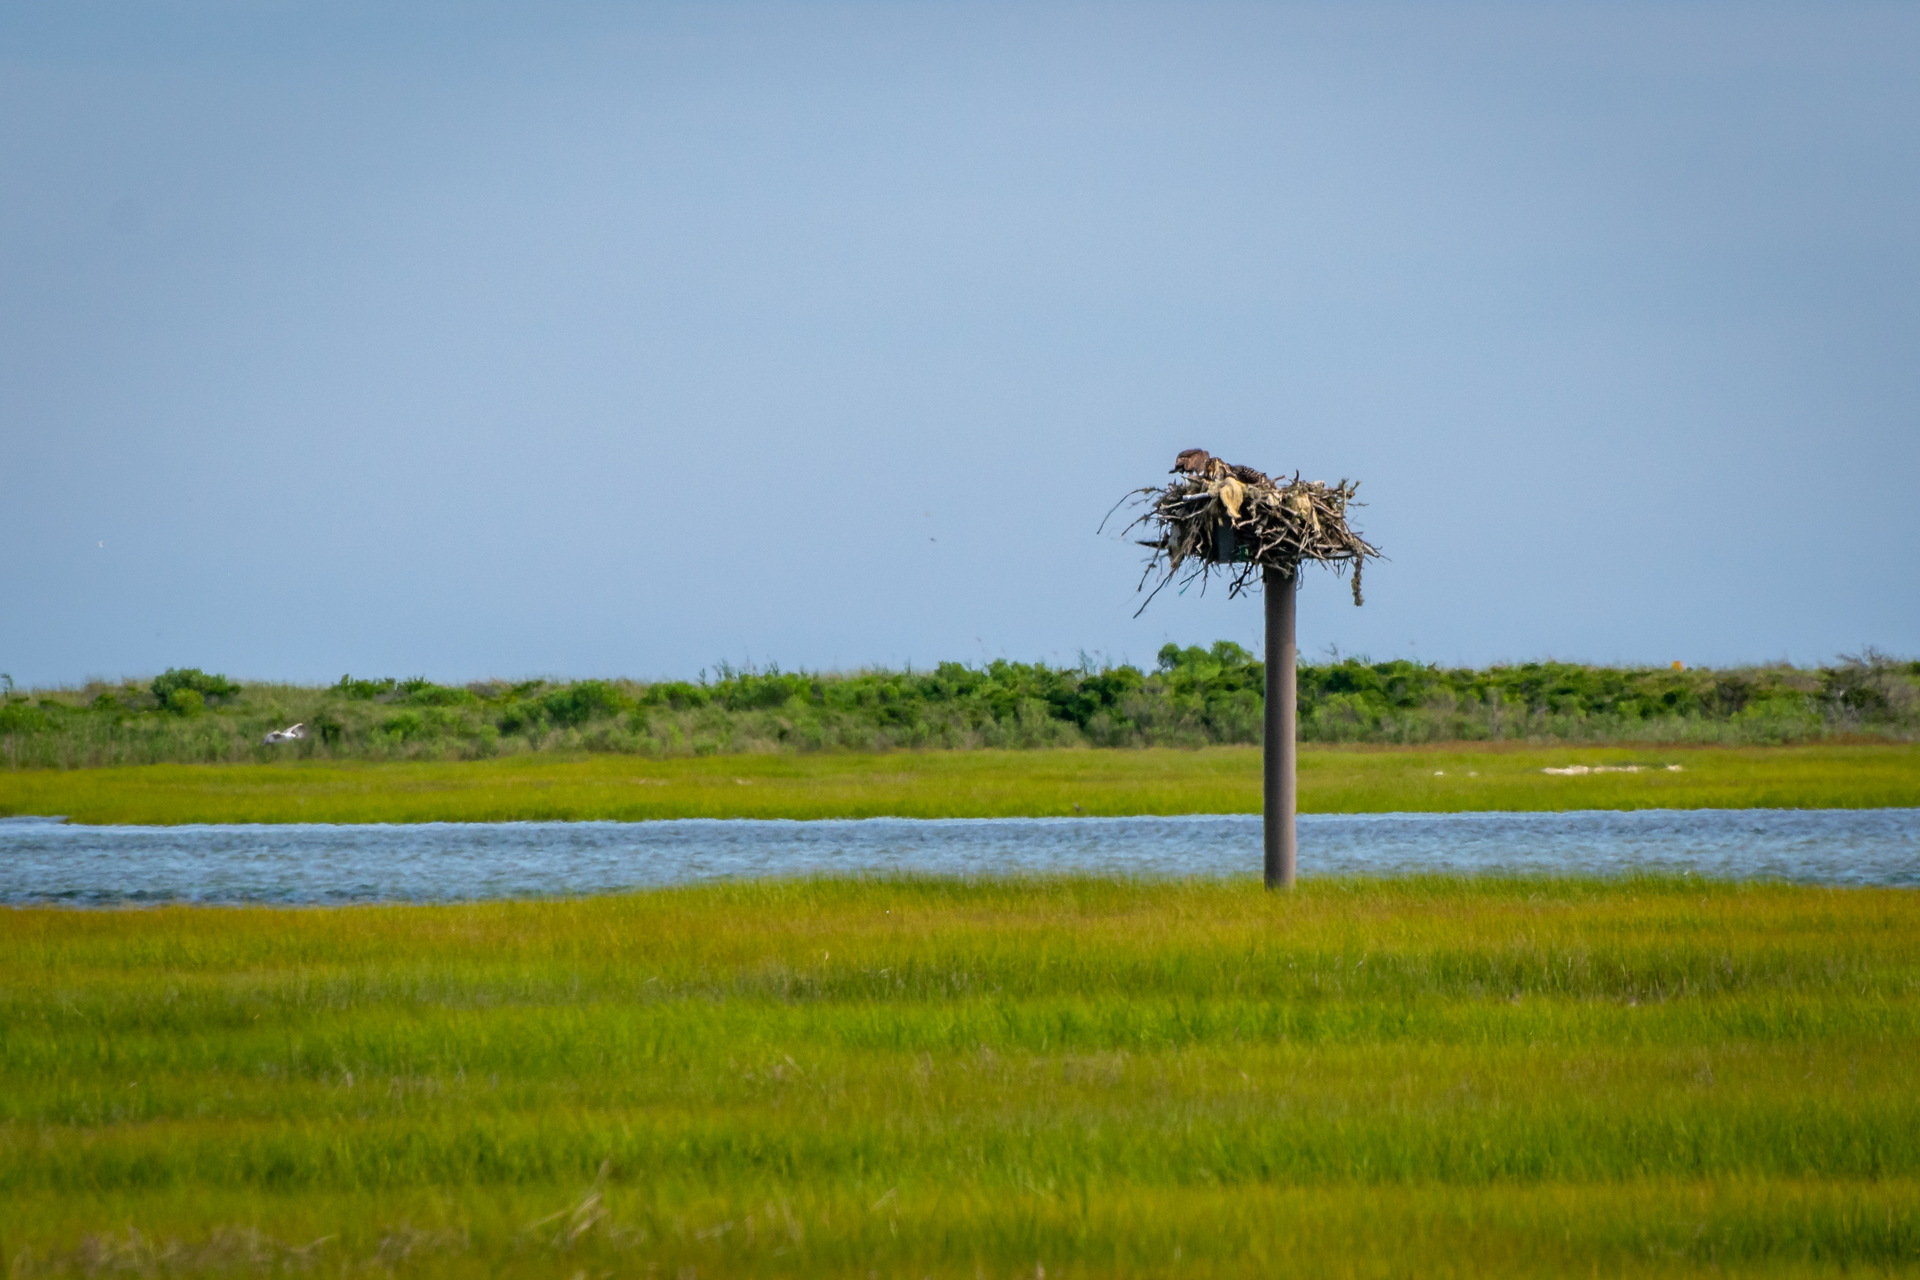 A bulky Osprey nest on top of a large poll standing in a green saltmarsh. A patch of open water behind the nesting pole.